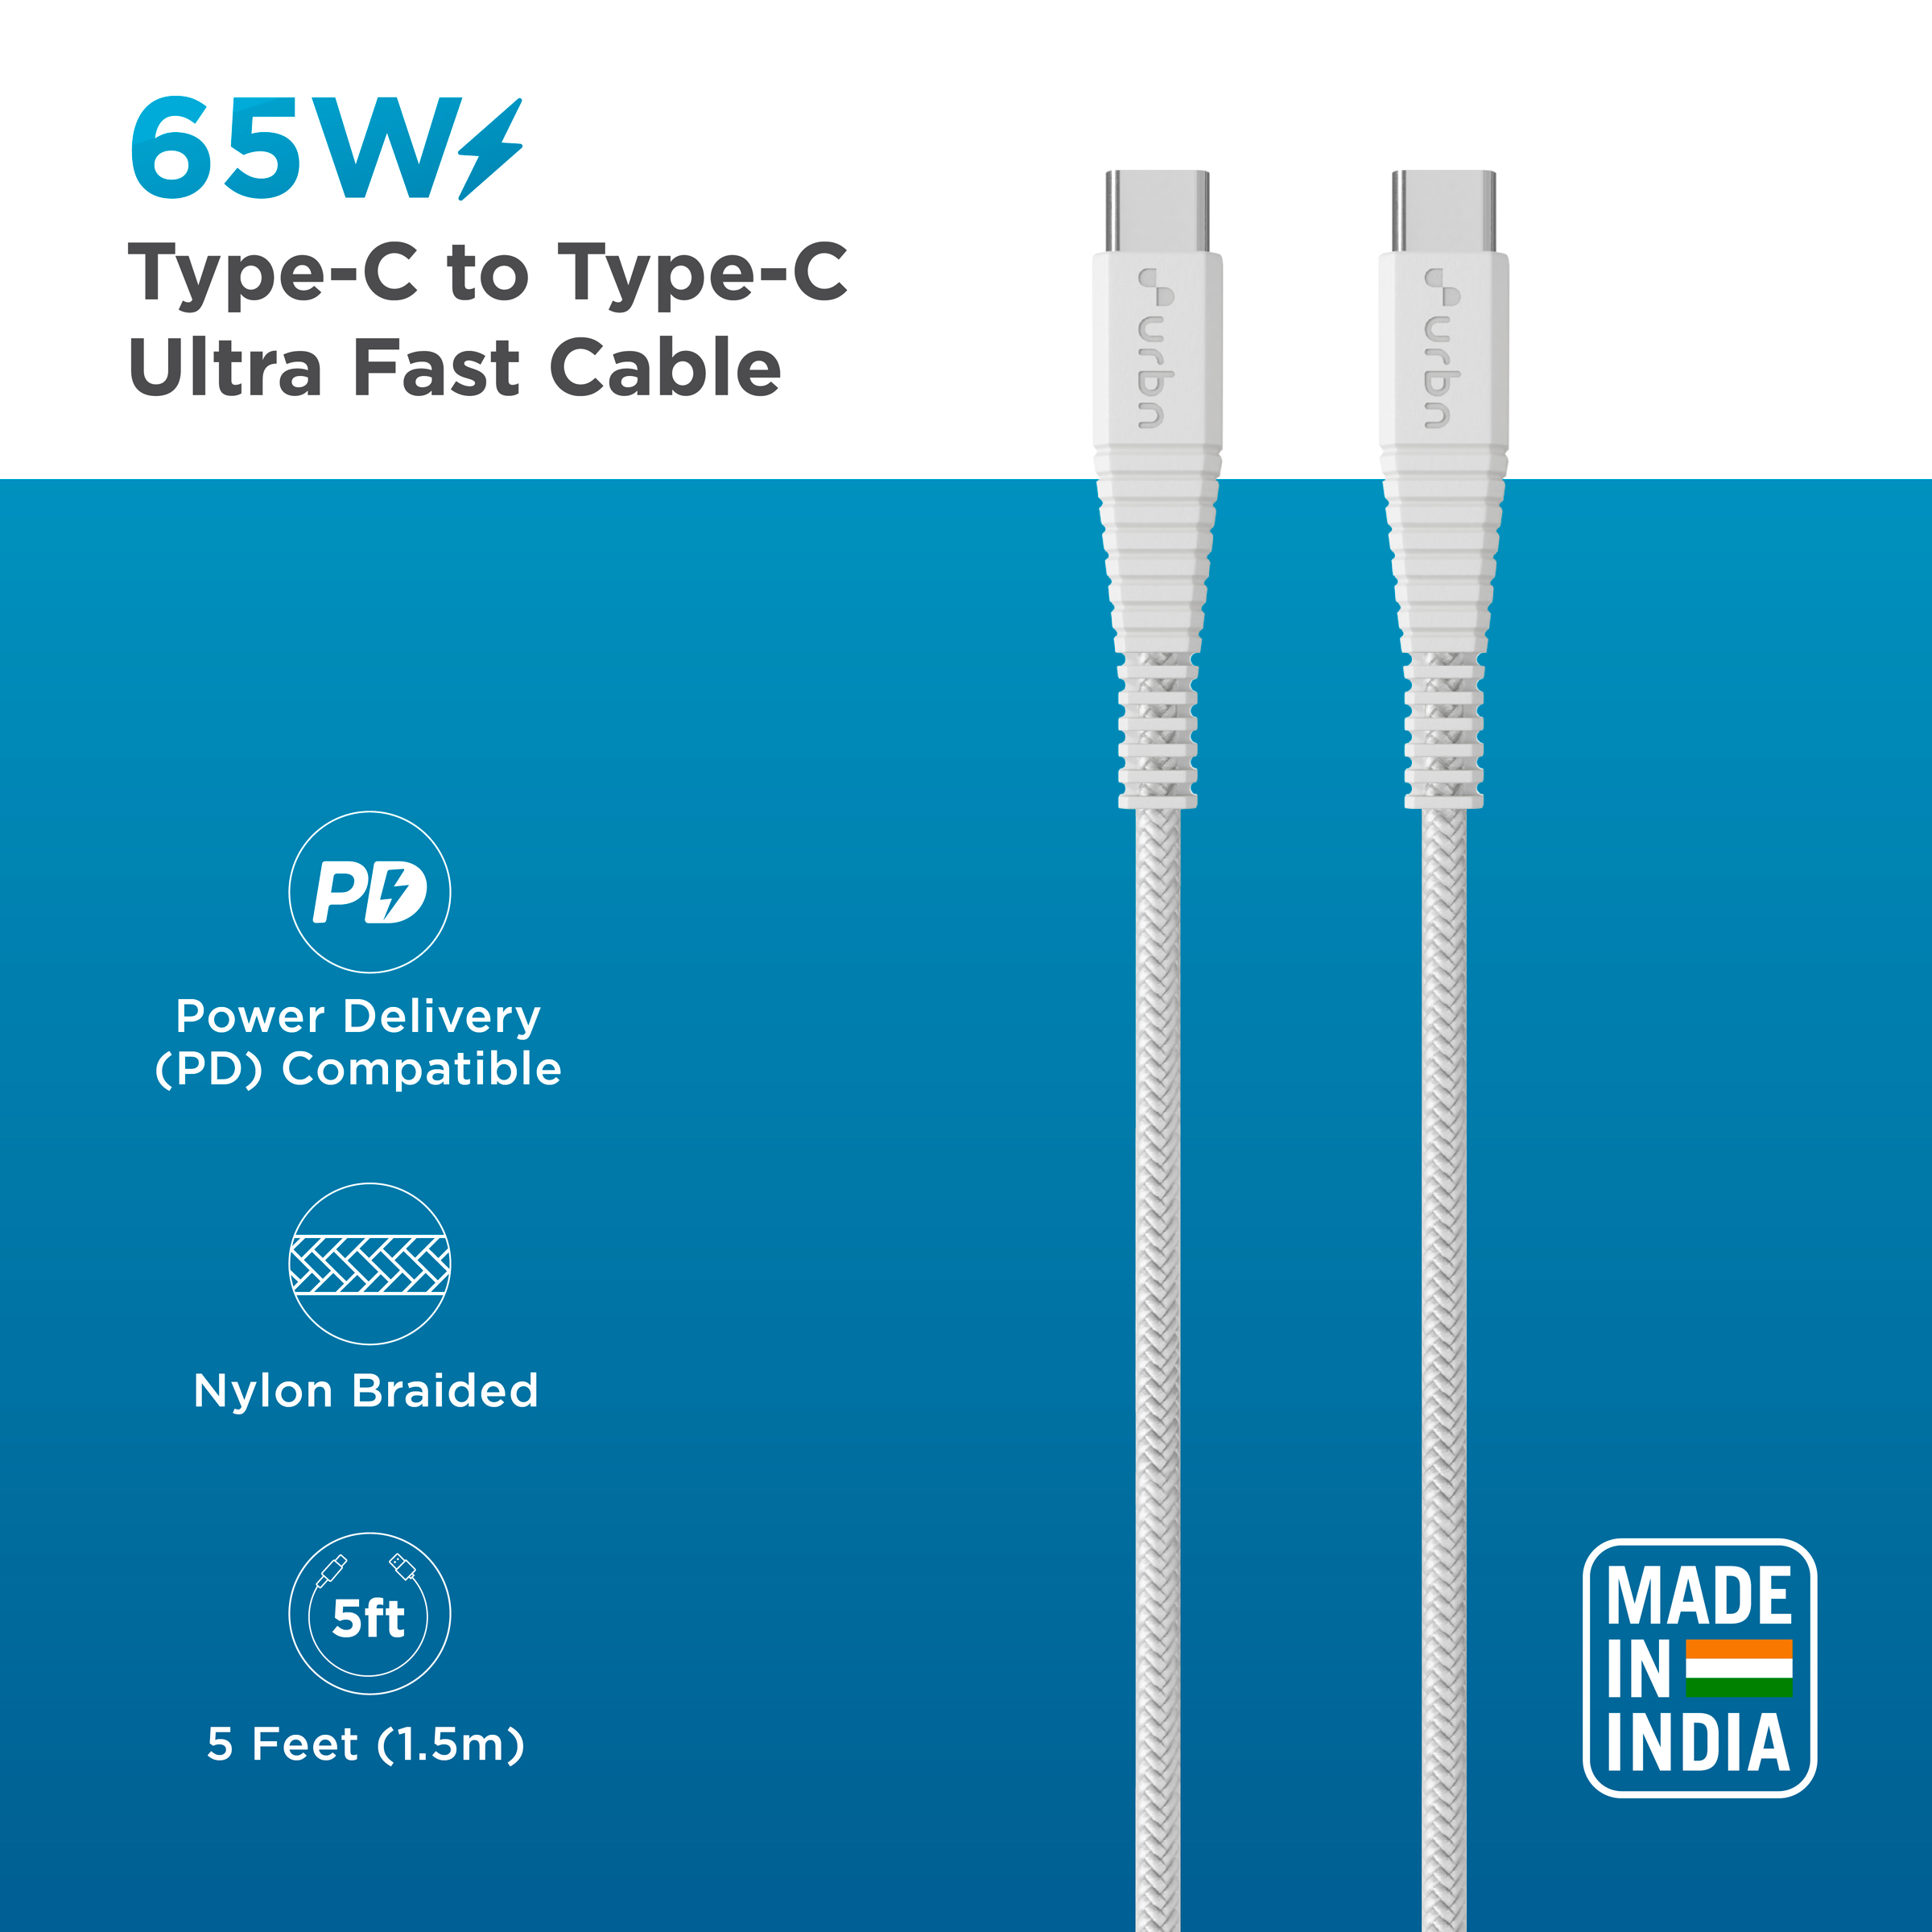 Urbn Nylon Braided 1.5 Meter USB 2.0 (Type-C) to USB 2.0 (Type-C) Power Charging/ Data Transfer USB Cable (480 MBPS Speed, UPC255_WH, White)_2